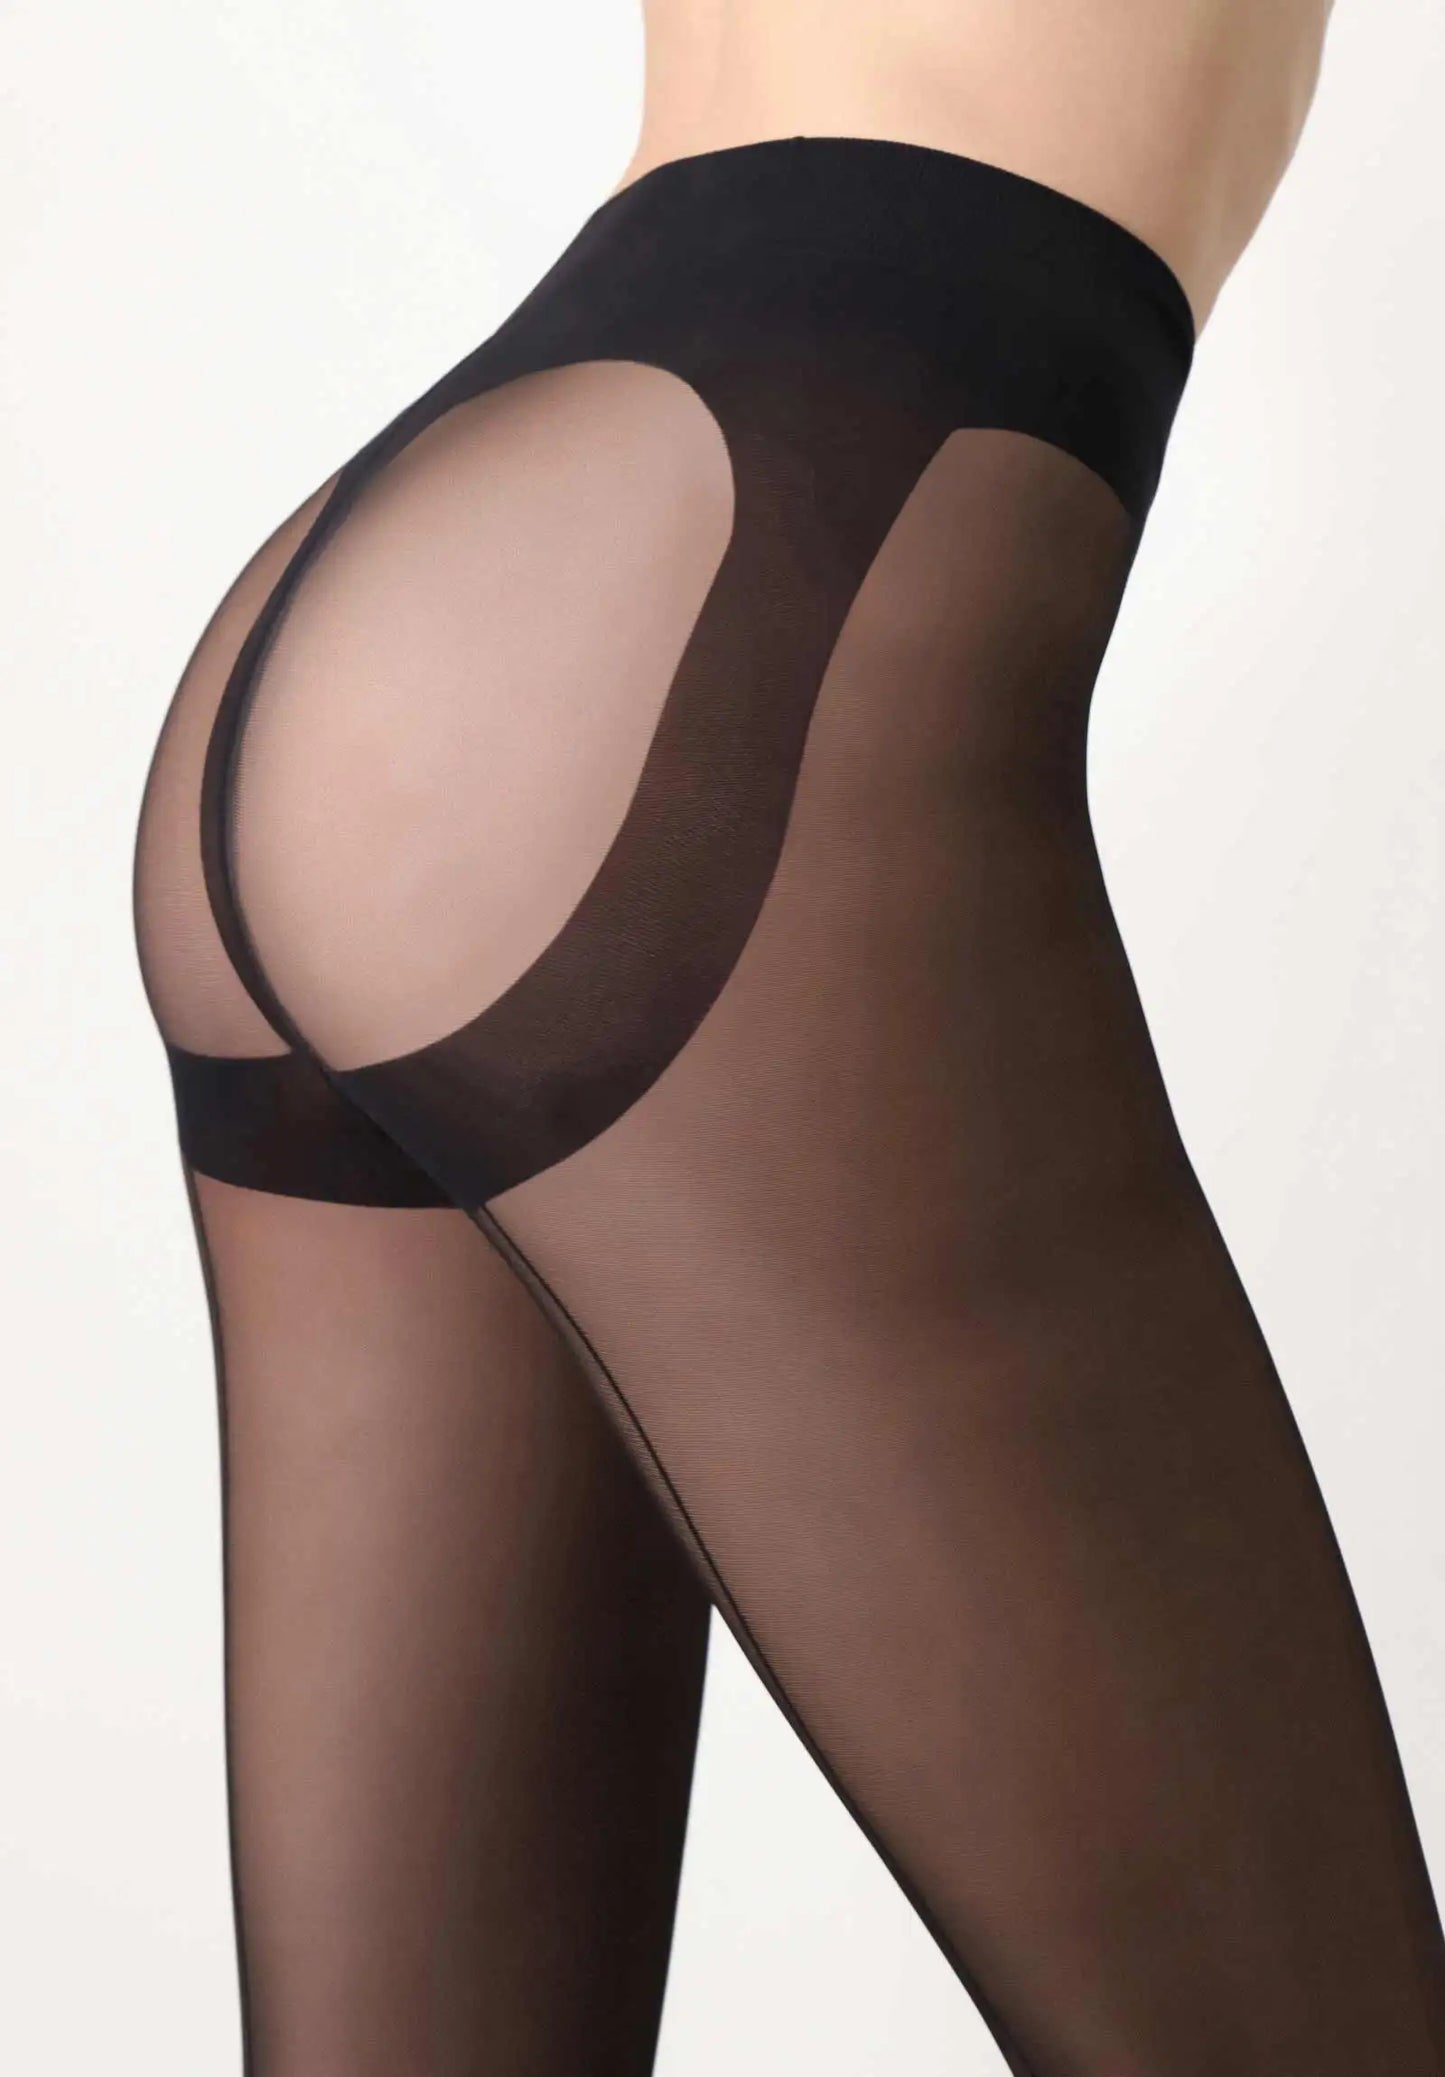 Oroblù Shock Up Line Collant - Sheer black tights with a back-seam, shaping push-up panty control-top